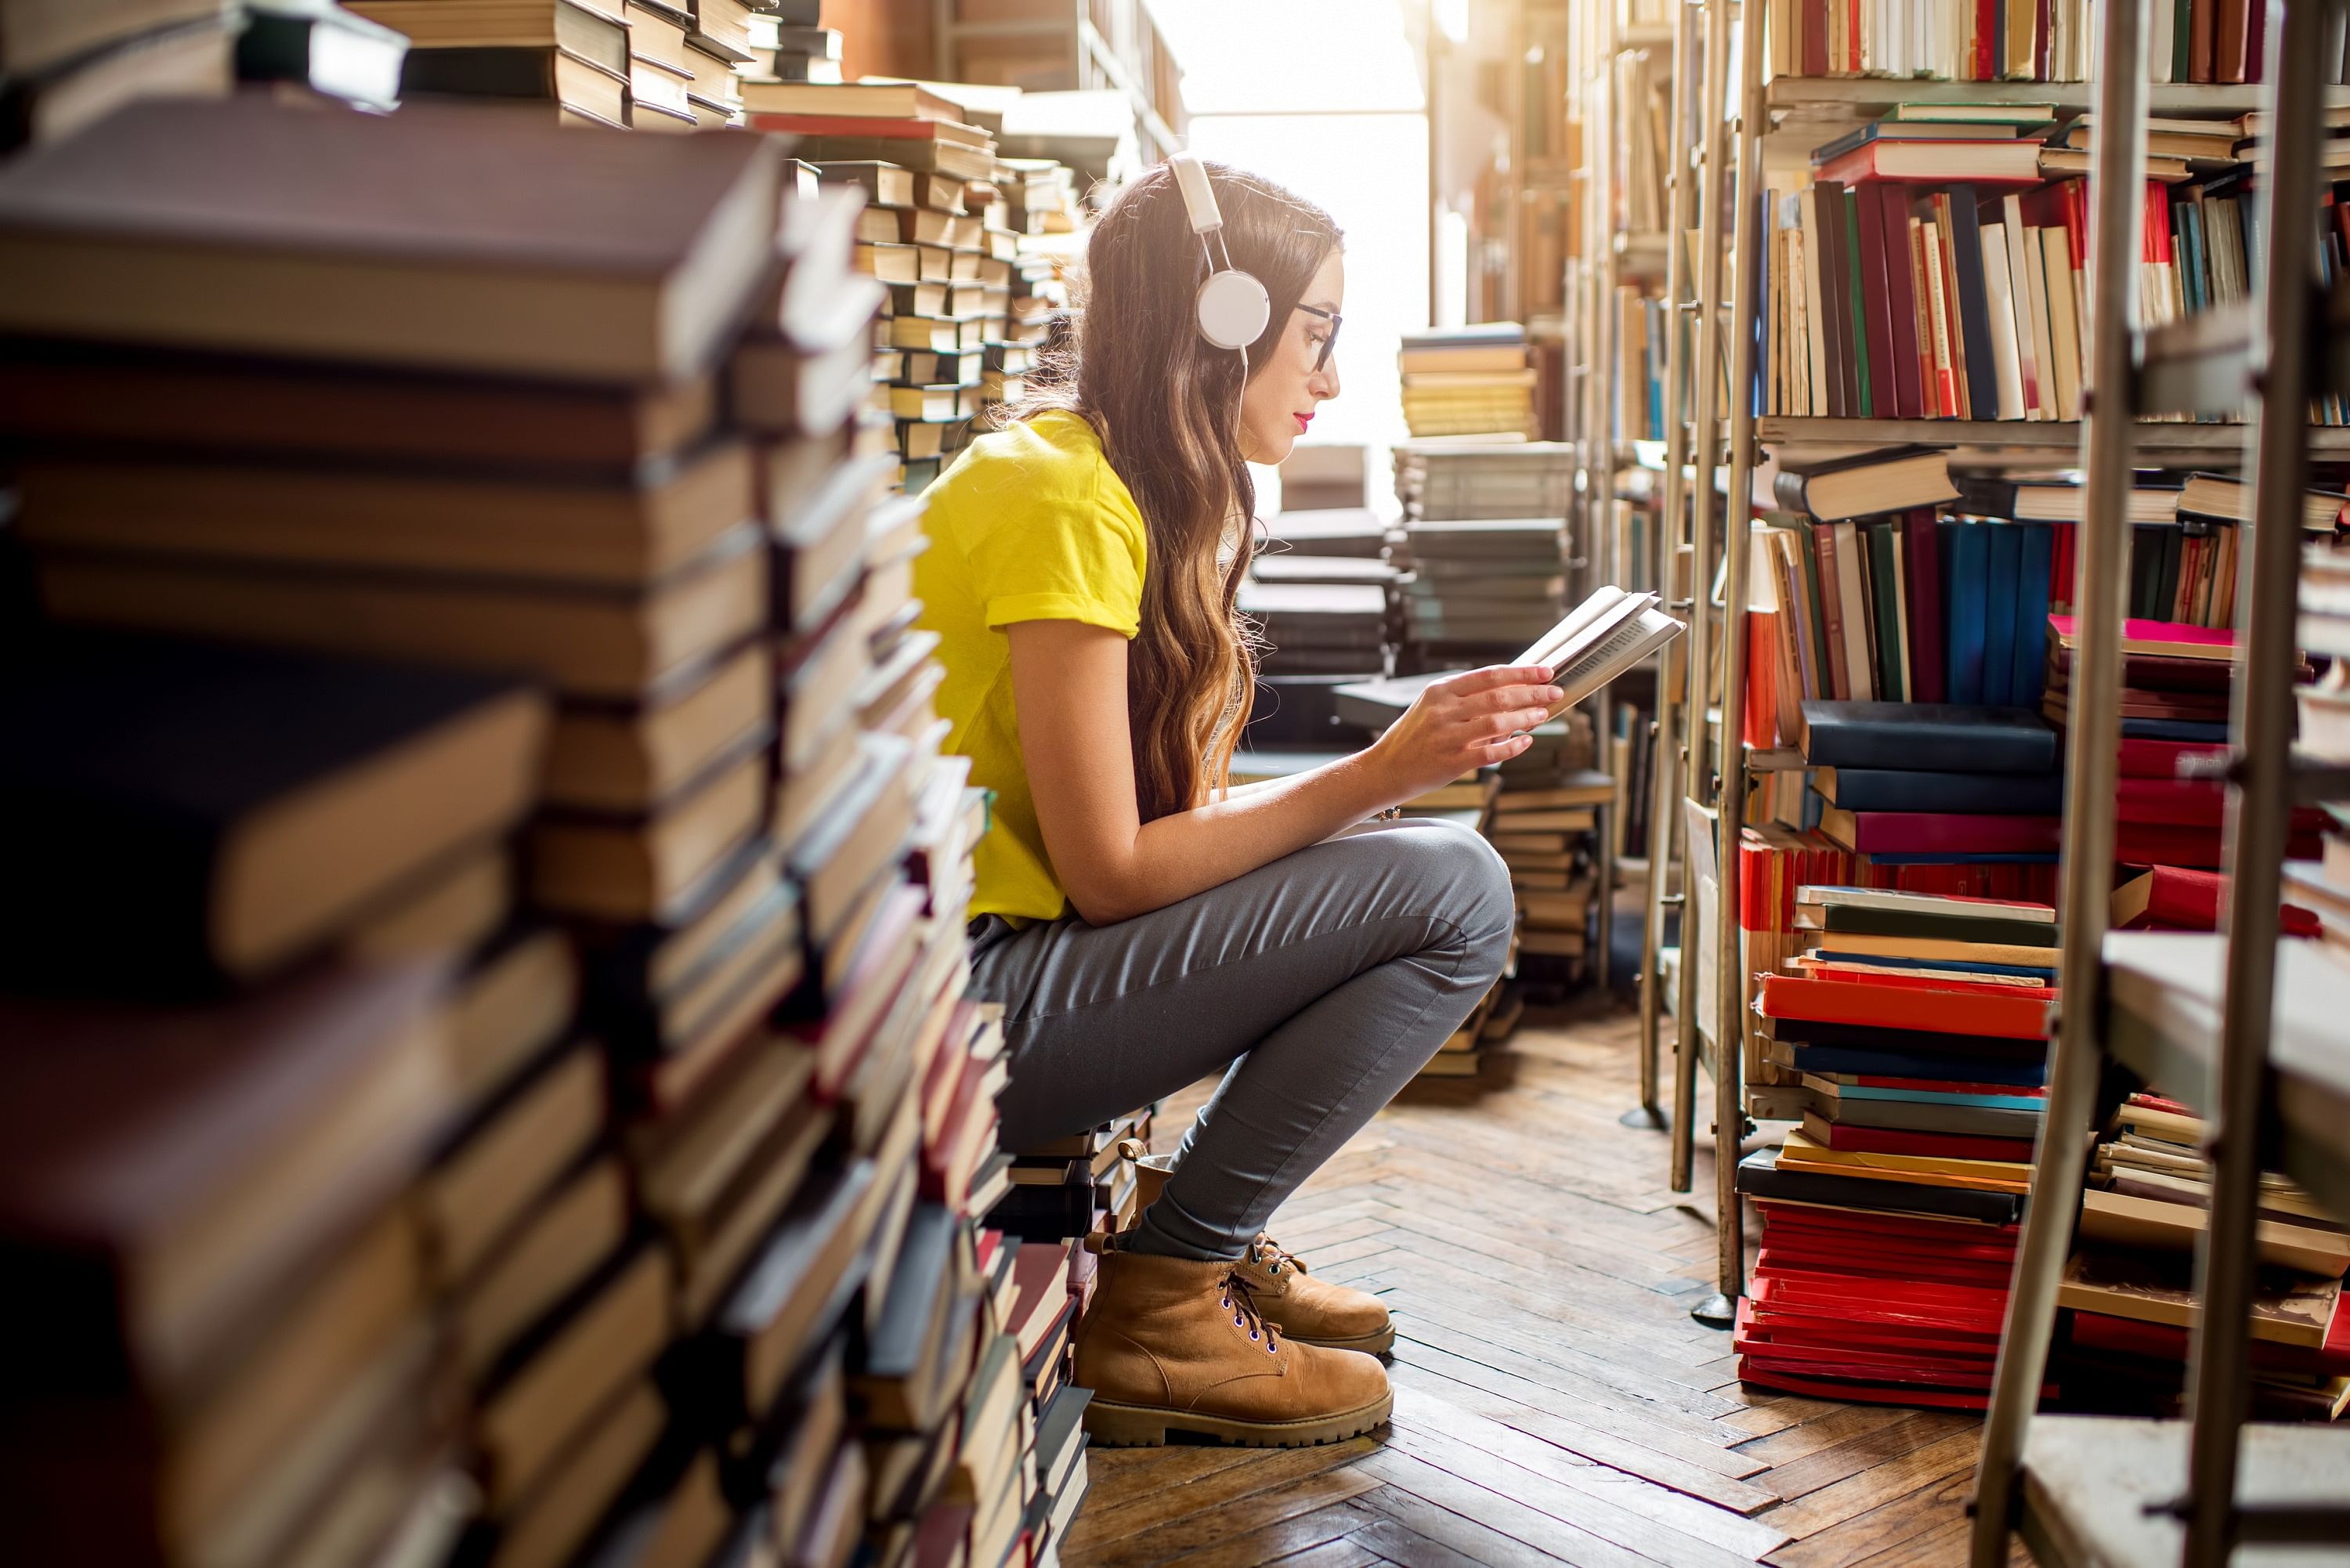 Audiobooks help people stay connected to theworld of literature.